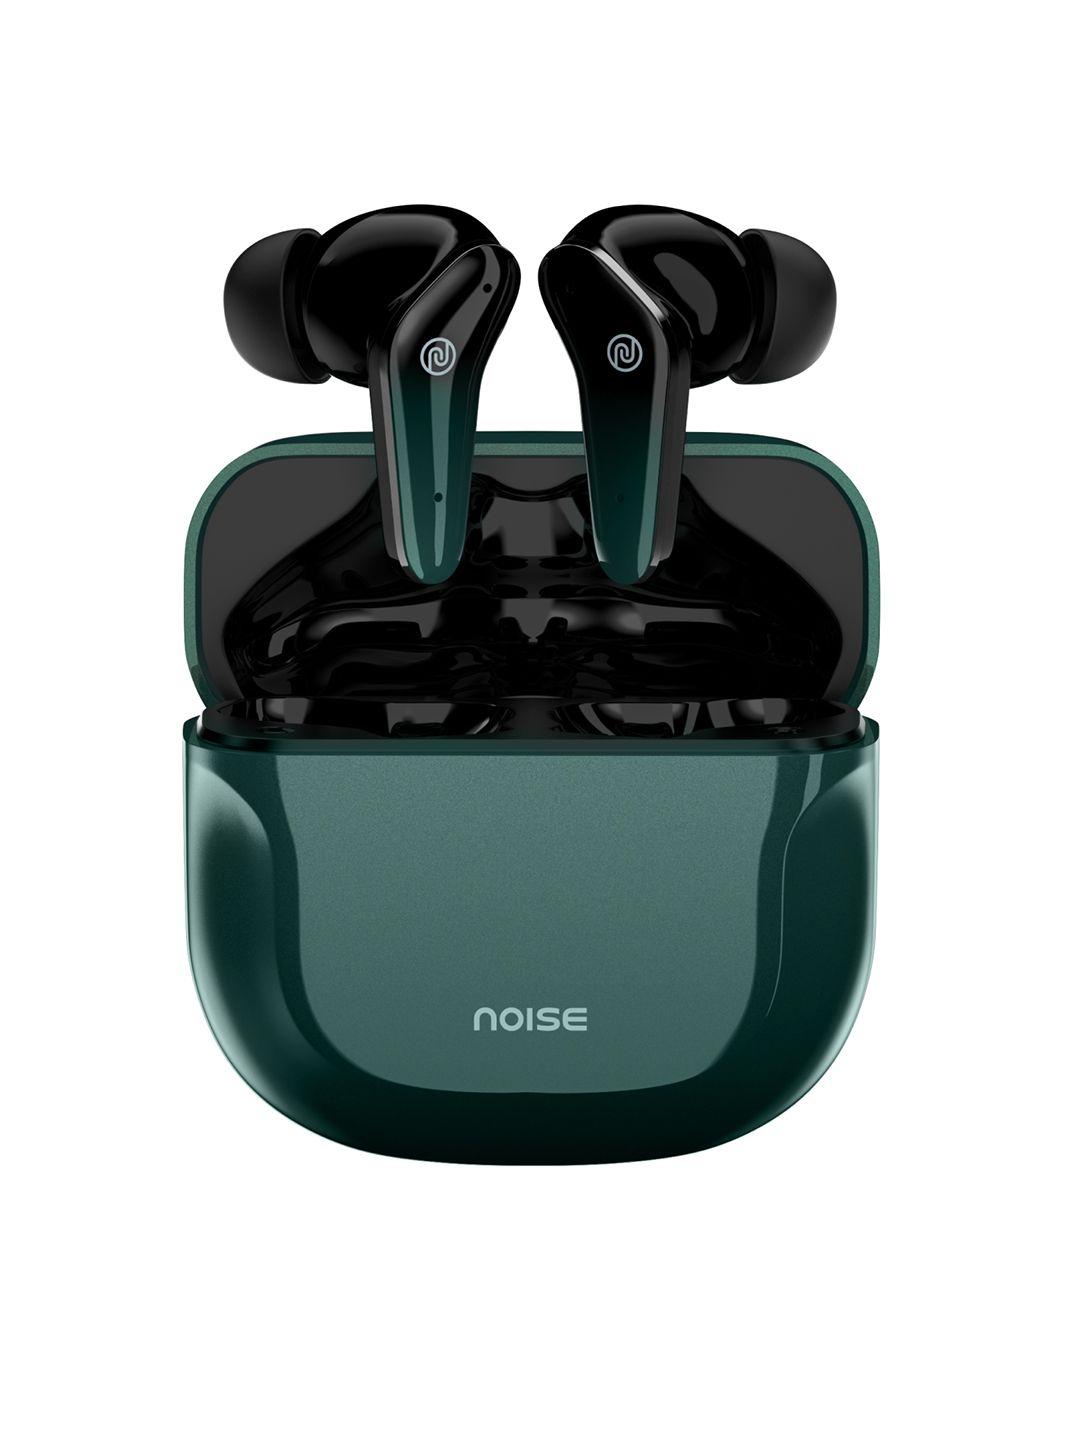 noise buds vs102 pro truly wireless earbuds with 25db anc and 70hrs playtime